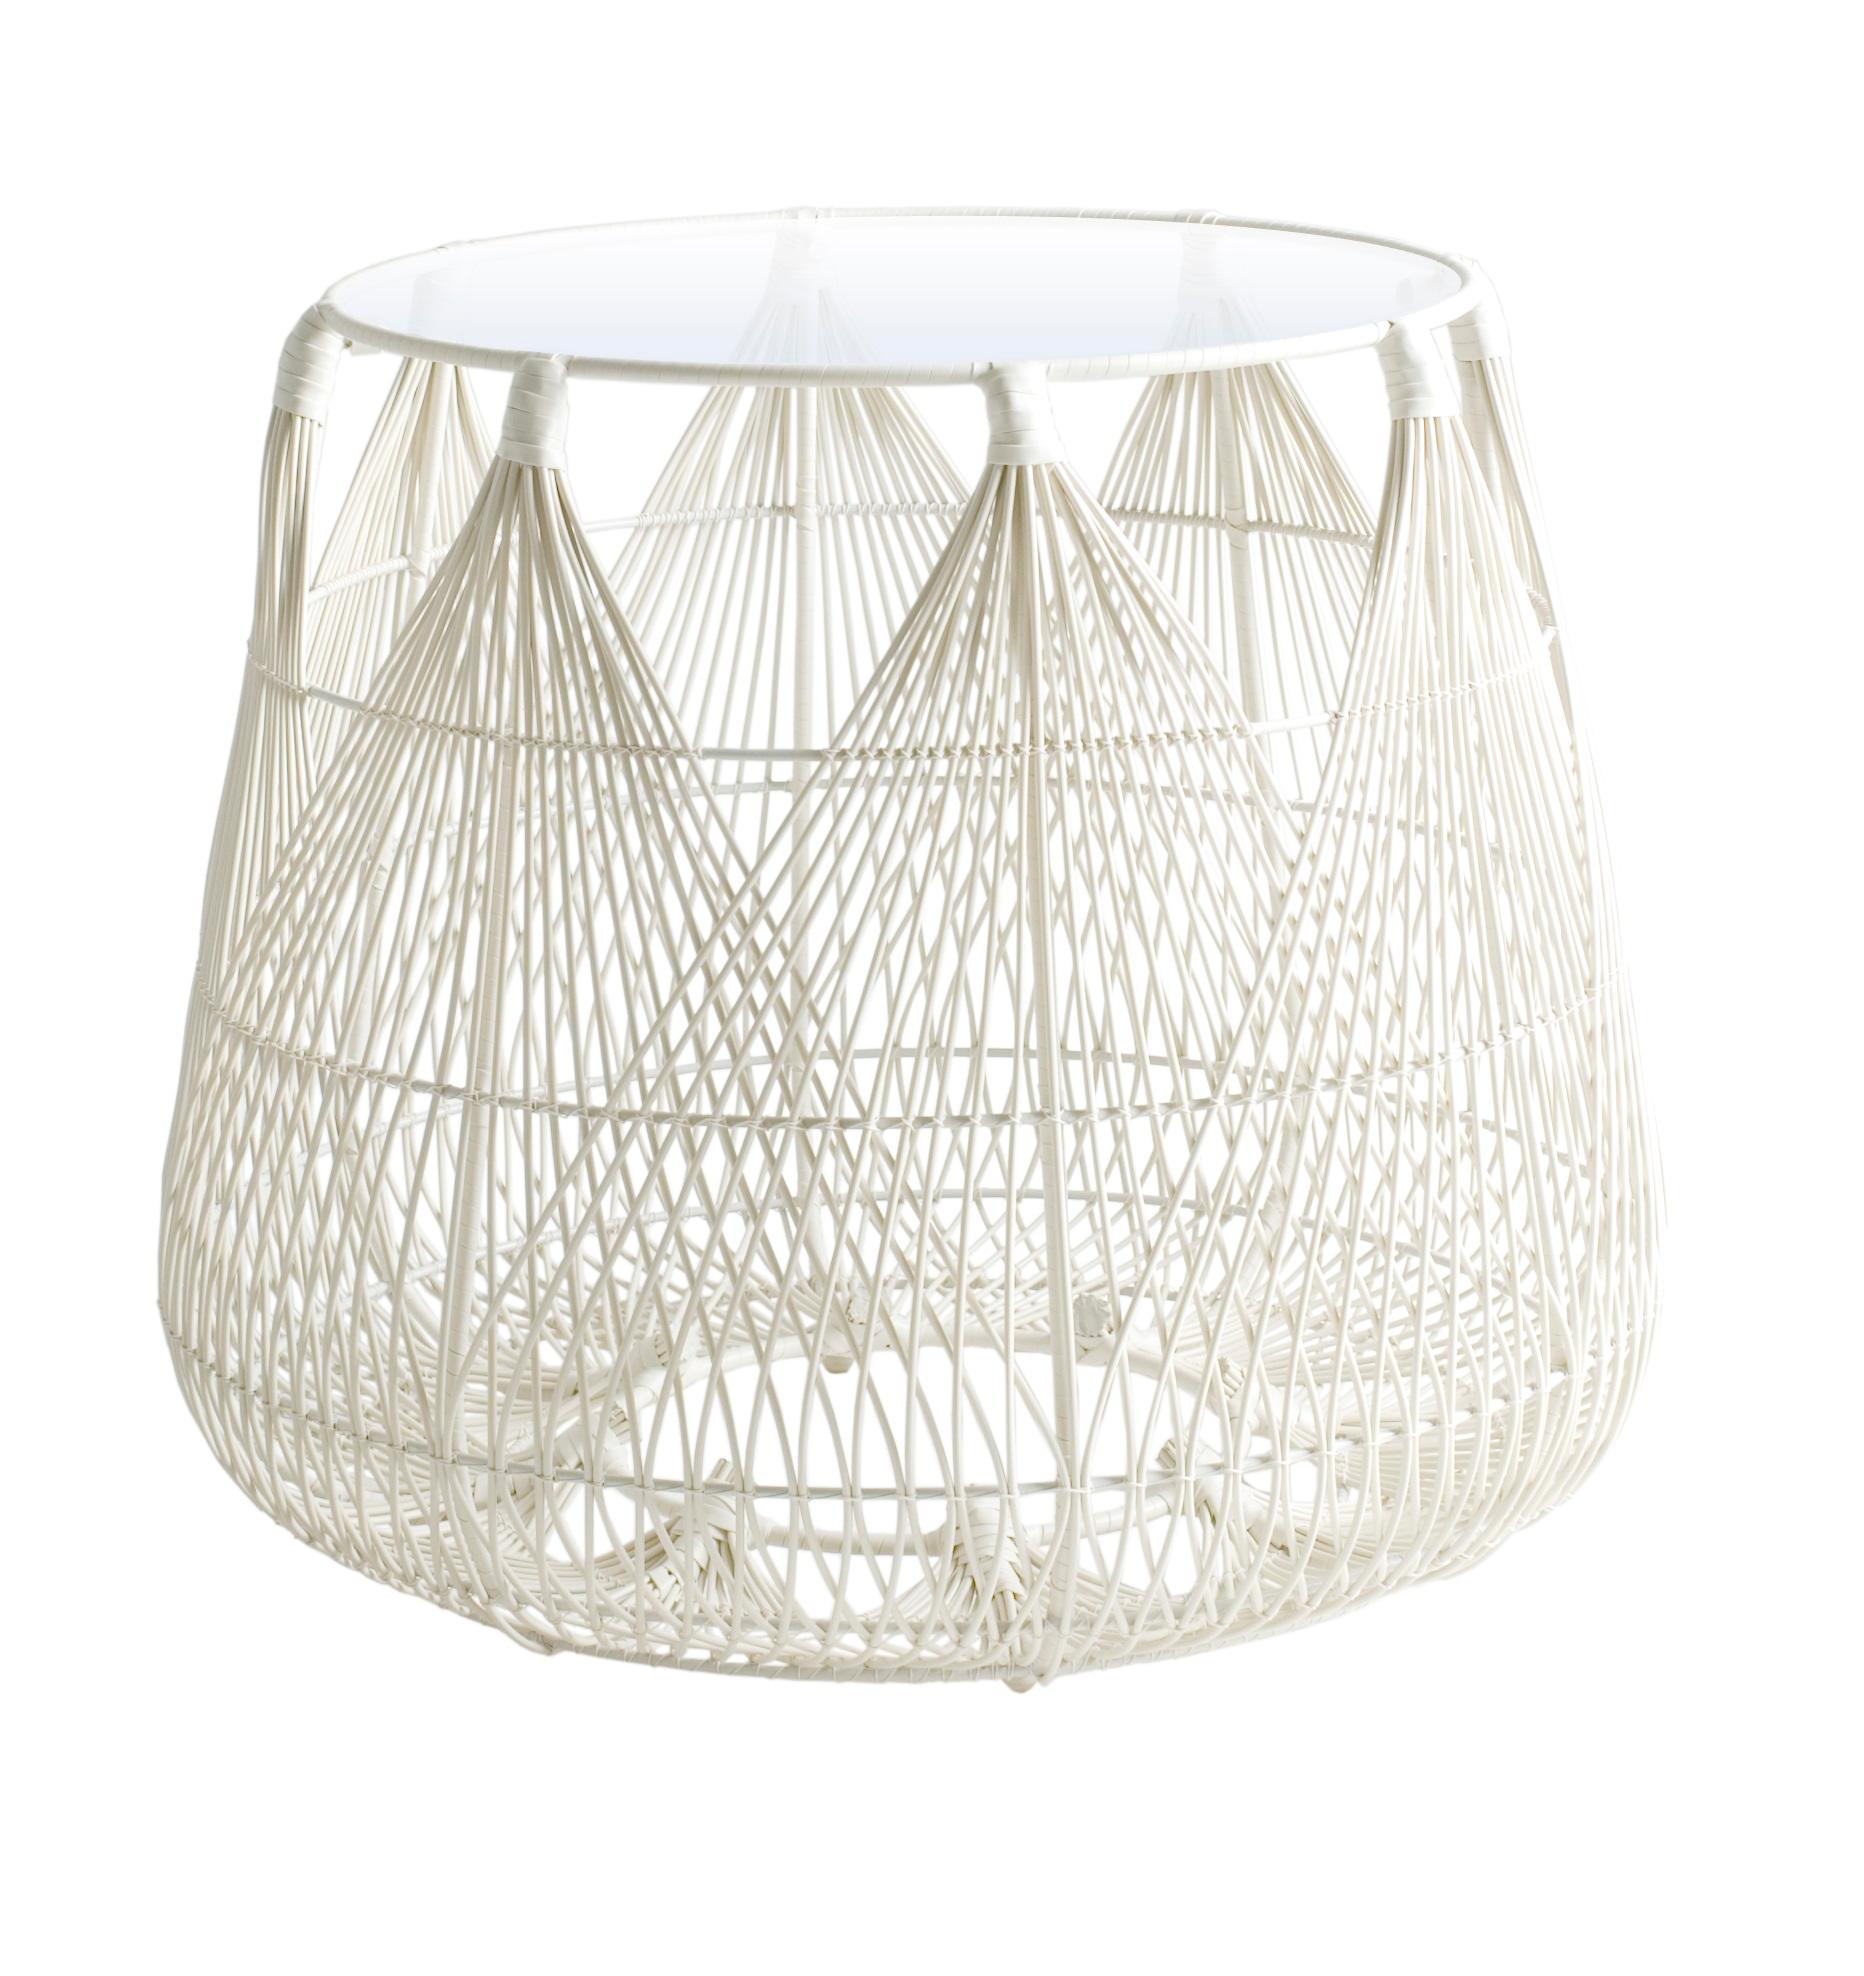 Hagia end table by Kenneth Cobonpue
Materials: Polyethelene, nylon. Steel.
Also available in other colors. 
Dimensions: 
Glass diameter 42.5 cm x H 6mm
Table diameter 95 cm x H 40 cm 

Bask in Hagia’s regal luxury and romantic gothic